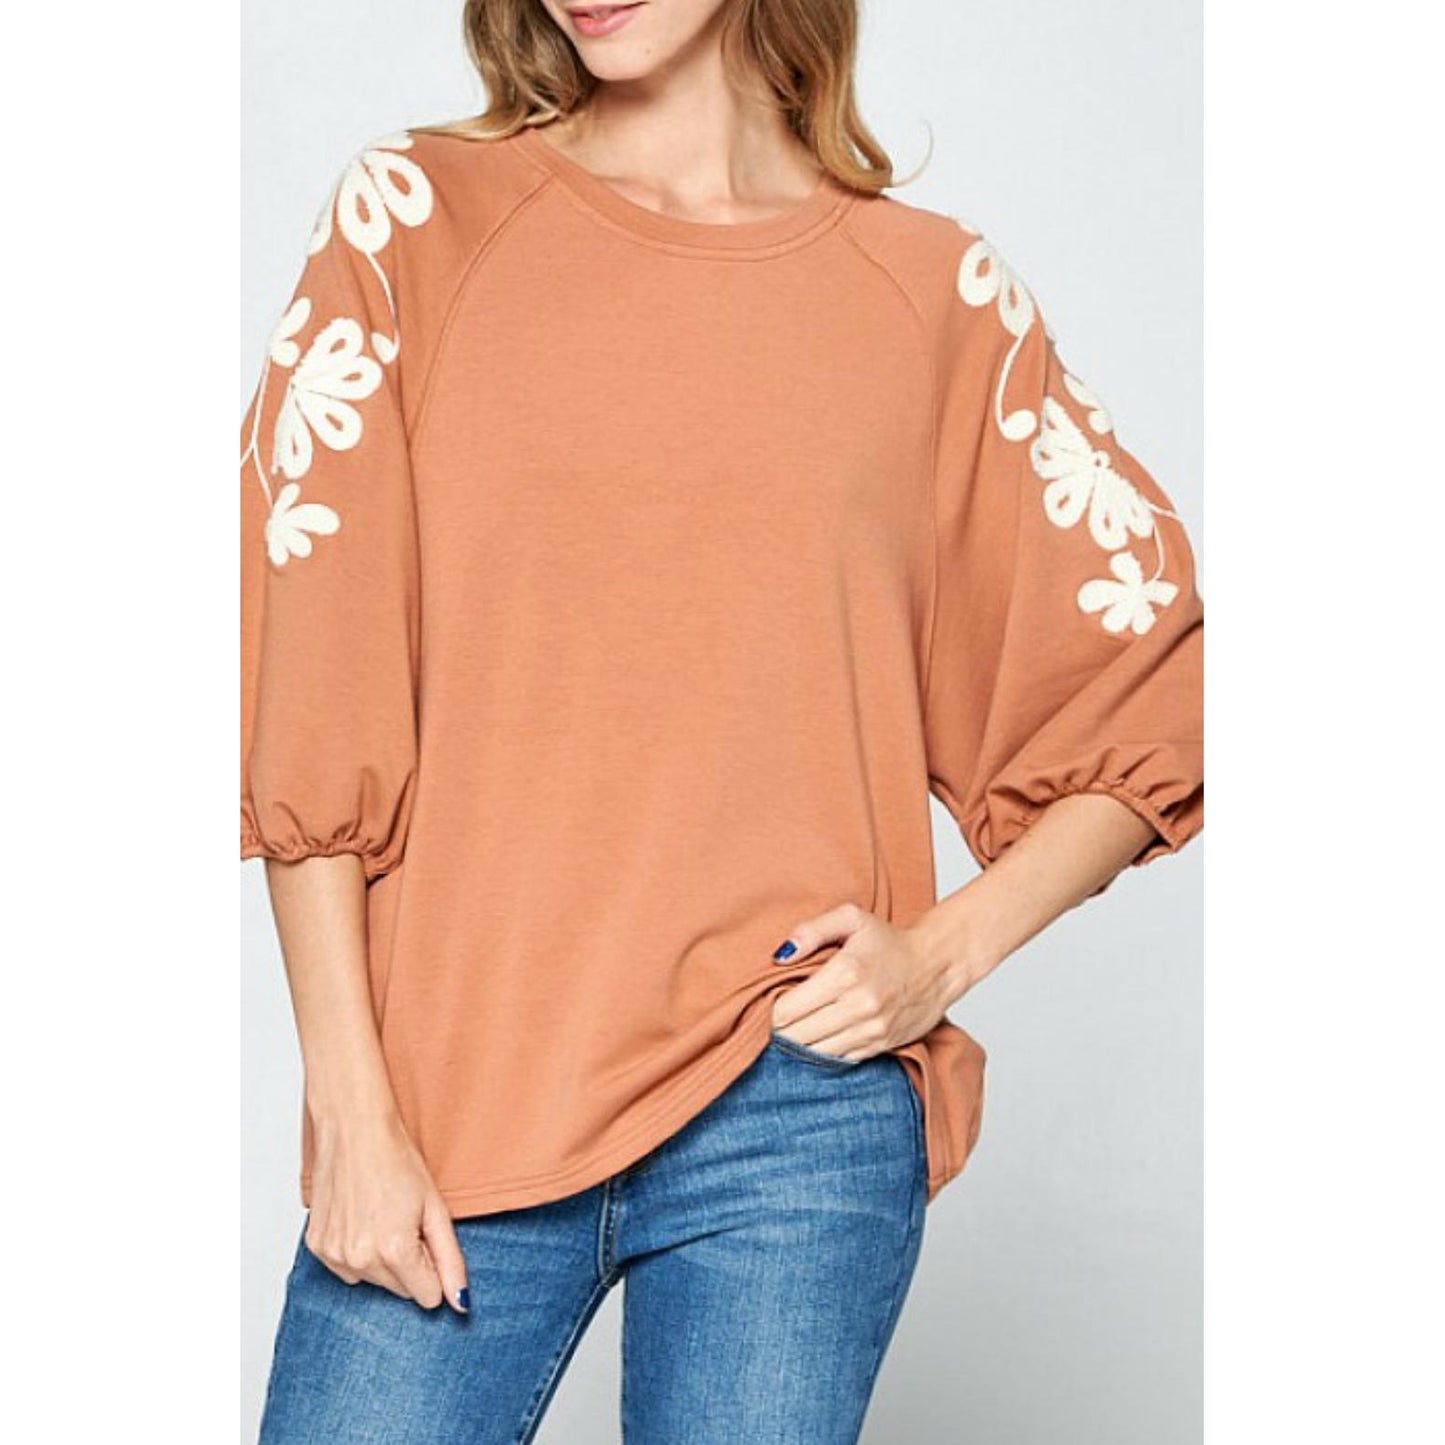 Chic Perspective Top